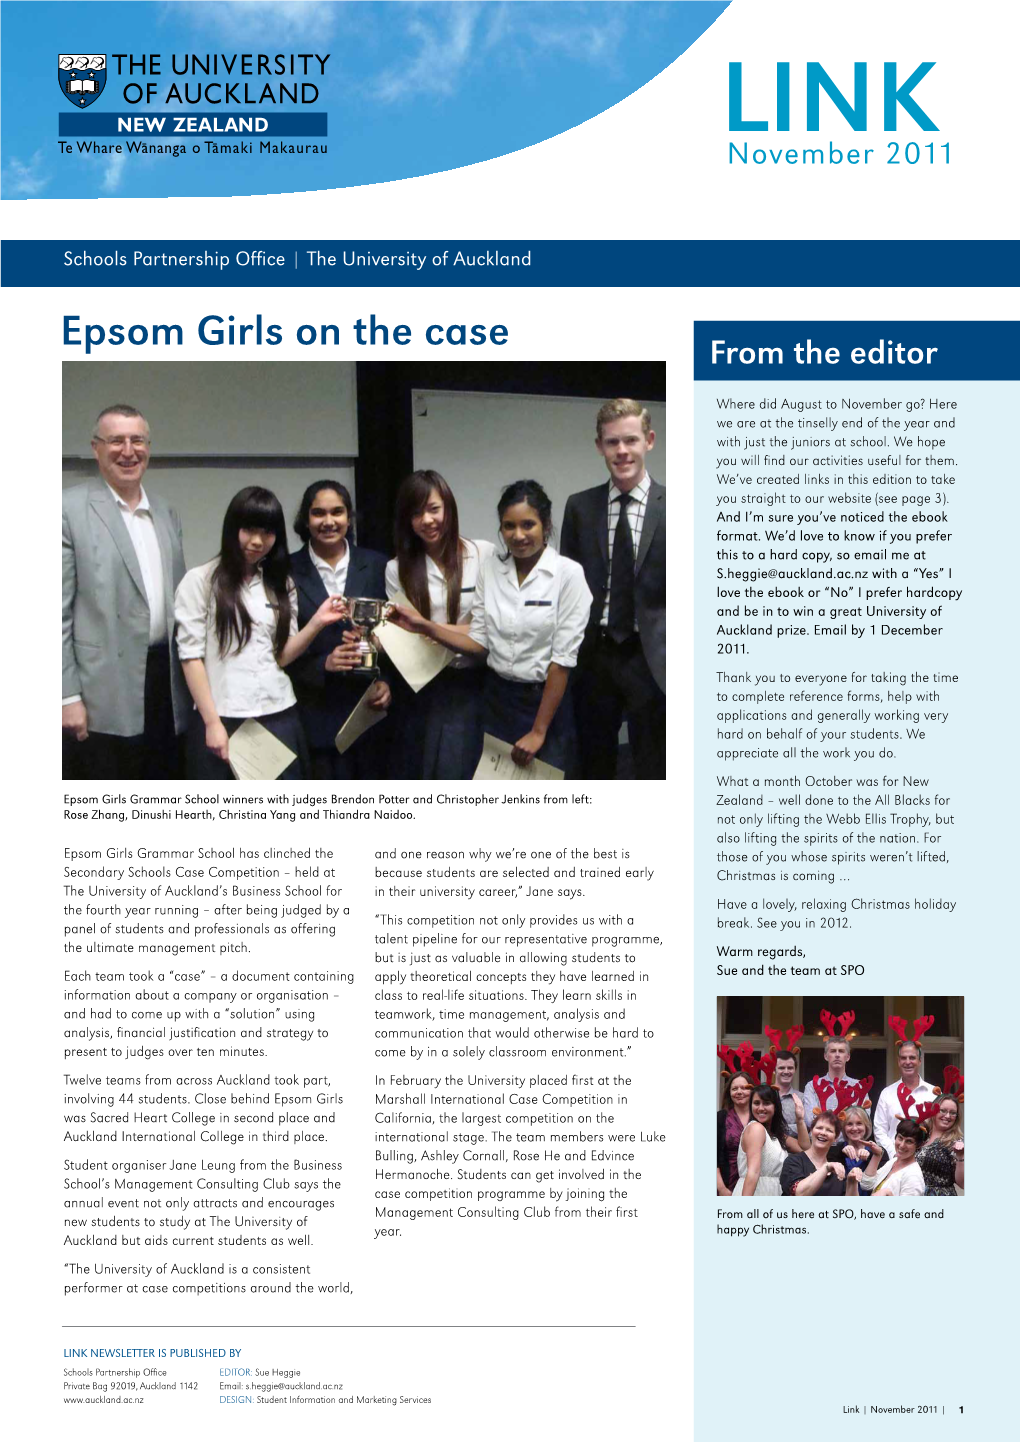 Epsom Girls on the Case from the Editor